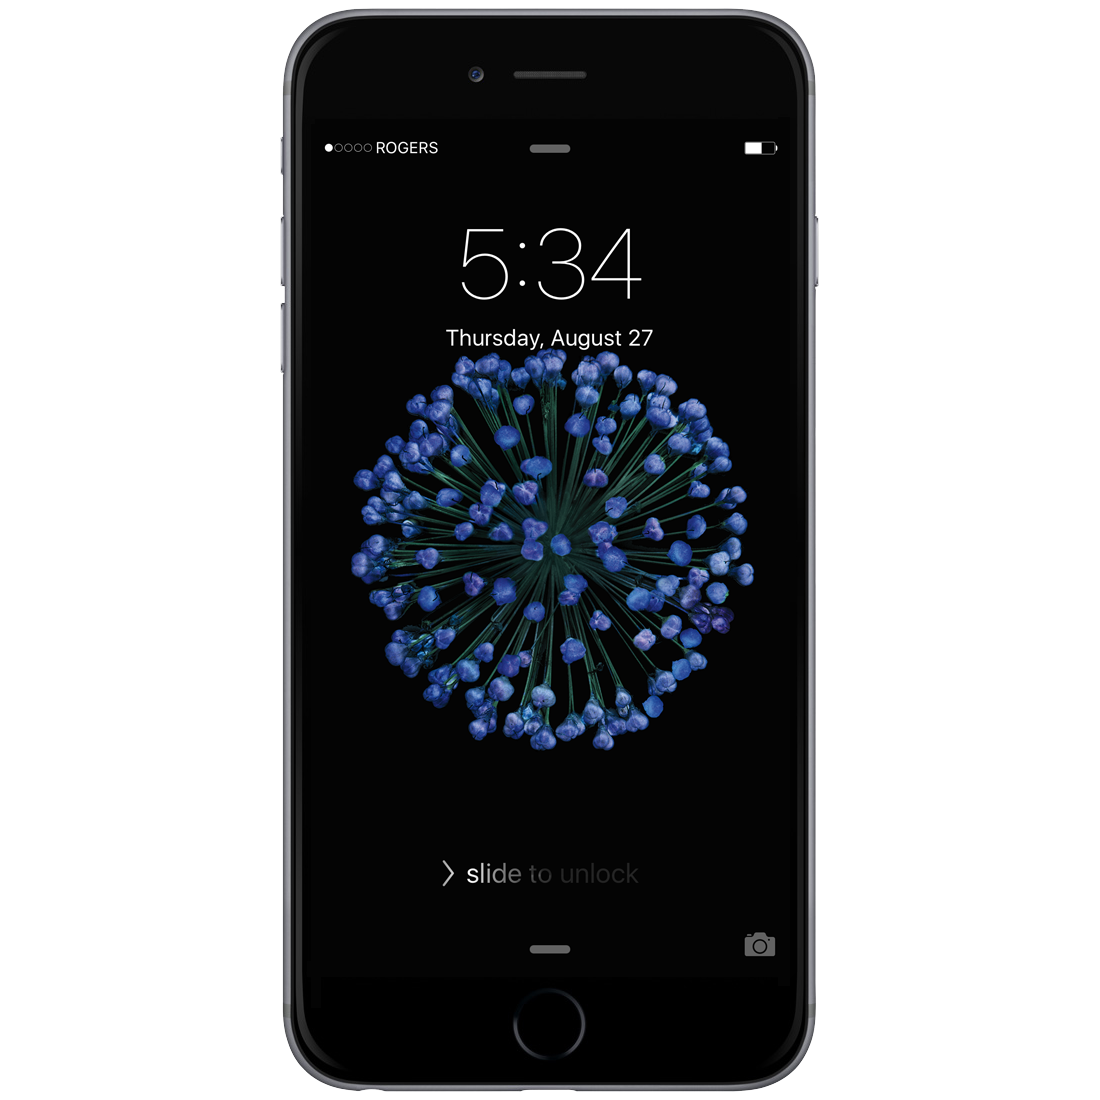 iClarified   Apple News   iPhone 6s to Feature Motion Wallpapers